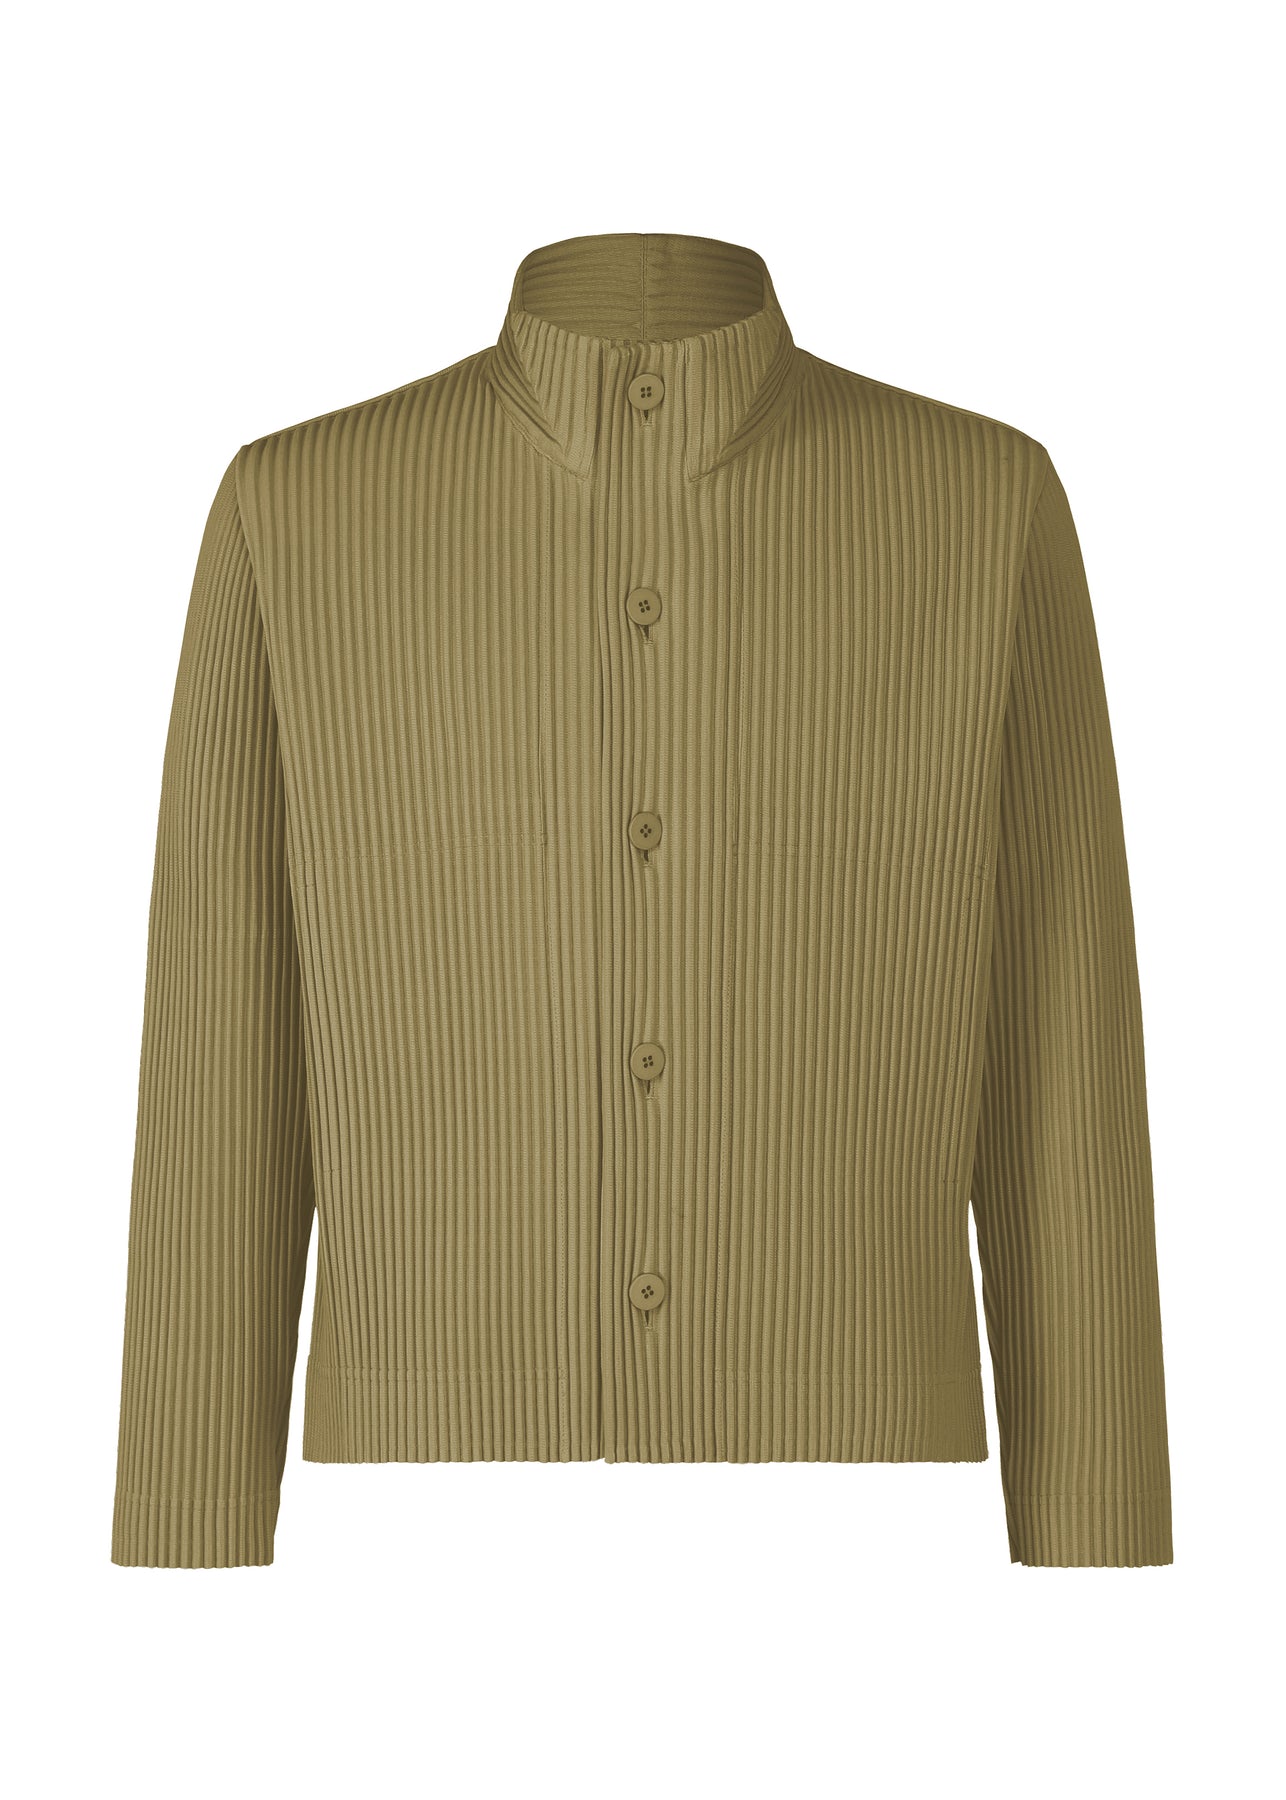 TAILORED PLEATS 1 JACKET | The official ISSEY MIYAKE ONLINE